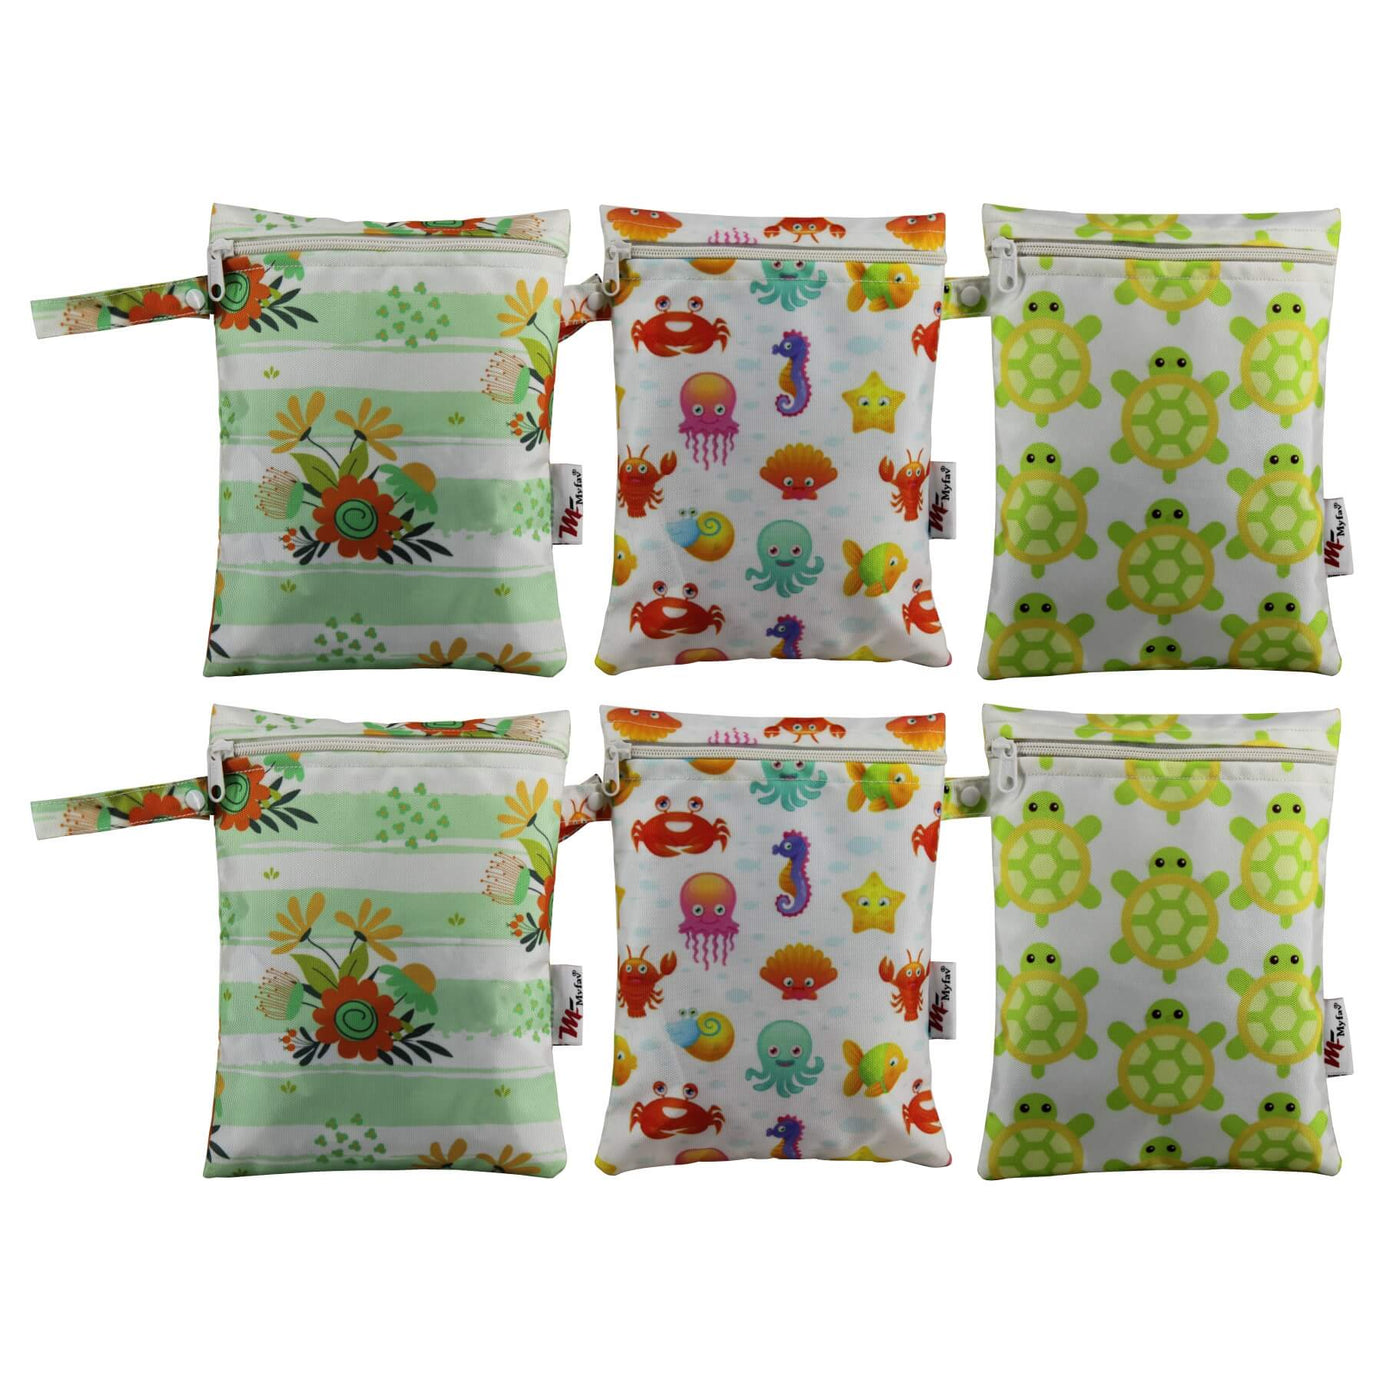 My Fav Multicolor Multiutility Wet Dry Pouch/Diaper Bag/Travel Pouch/Travel Kit - Pack of 6